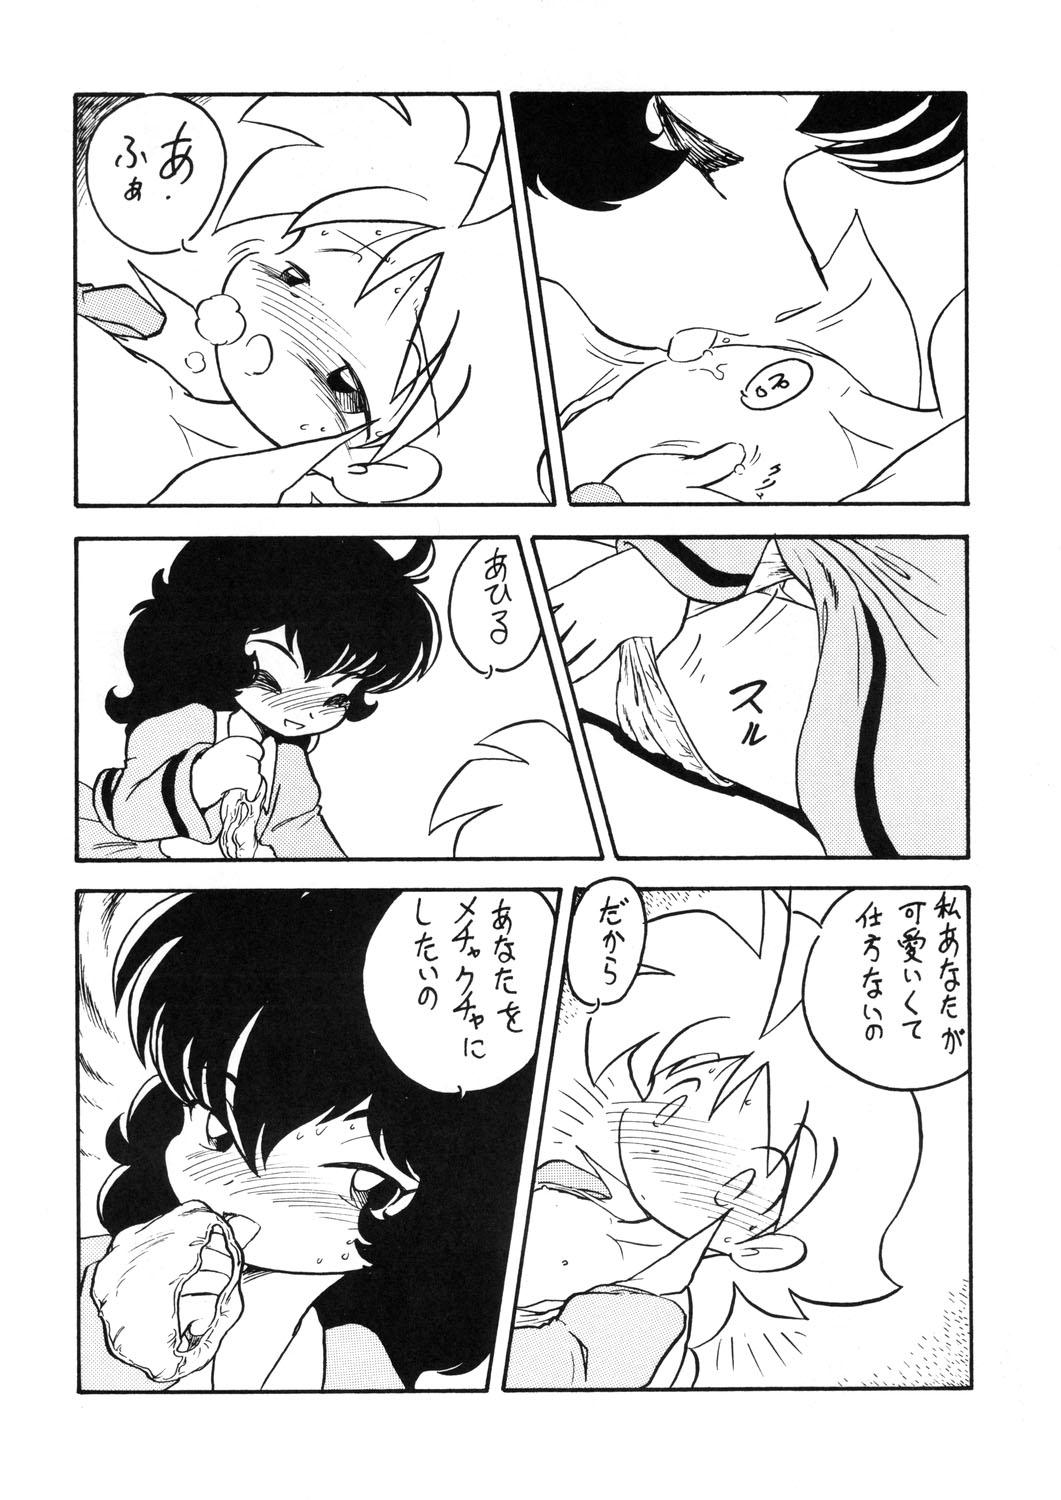 Transex Duck's Egg - Princess tutu Assfucked - Page 9